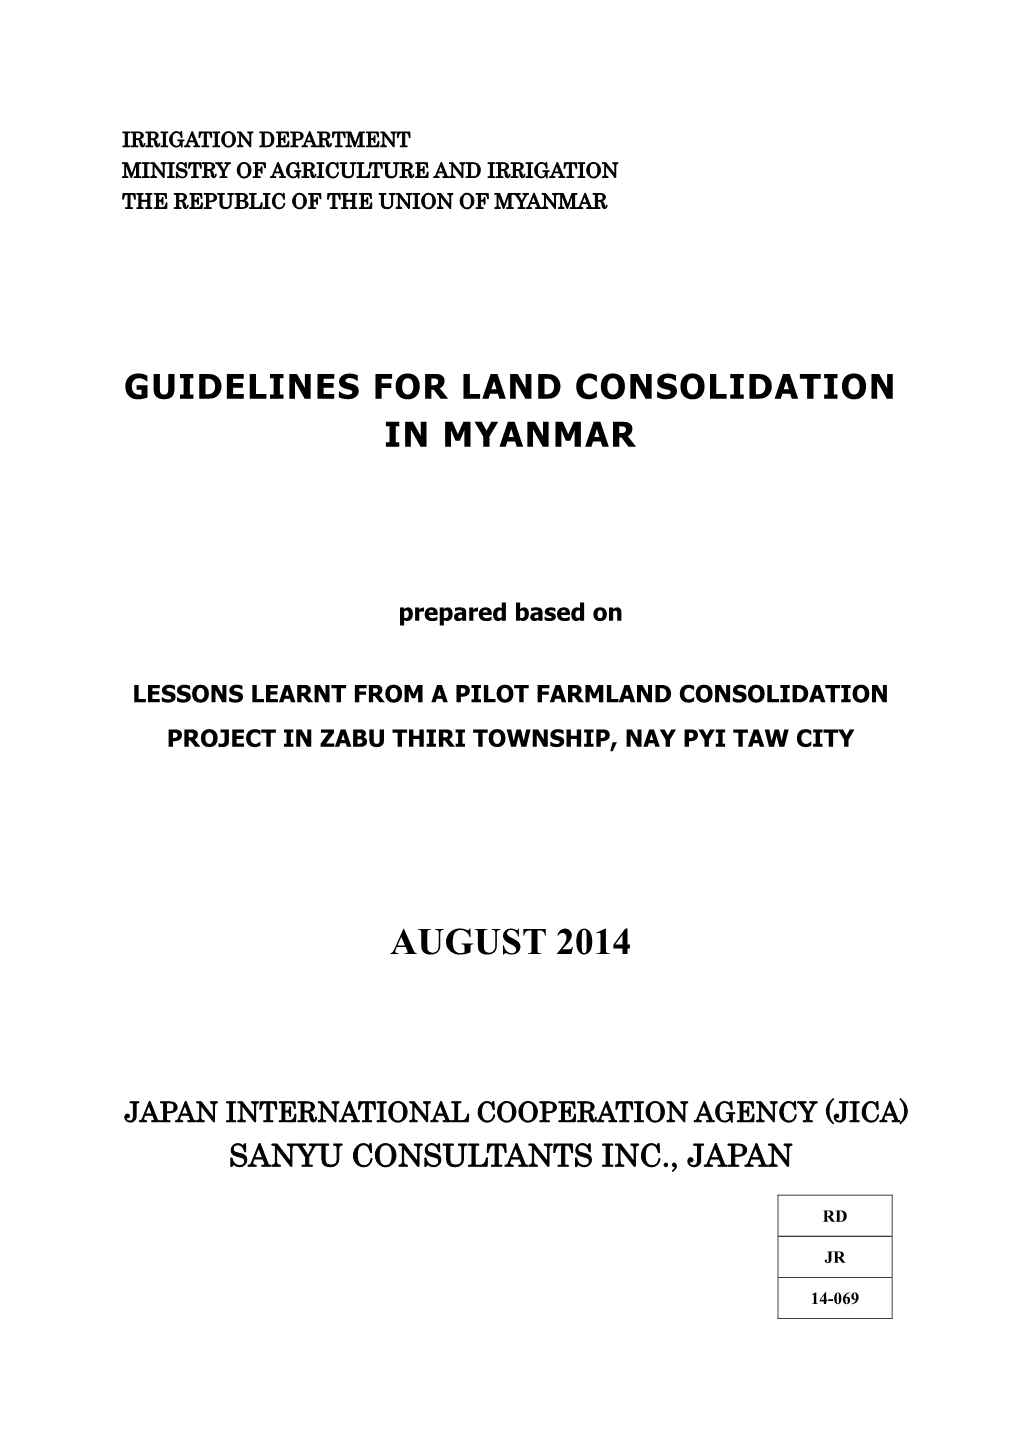 Guidelines for Land Consolidation in Myanmar